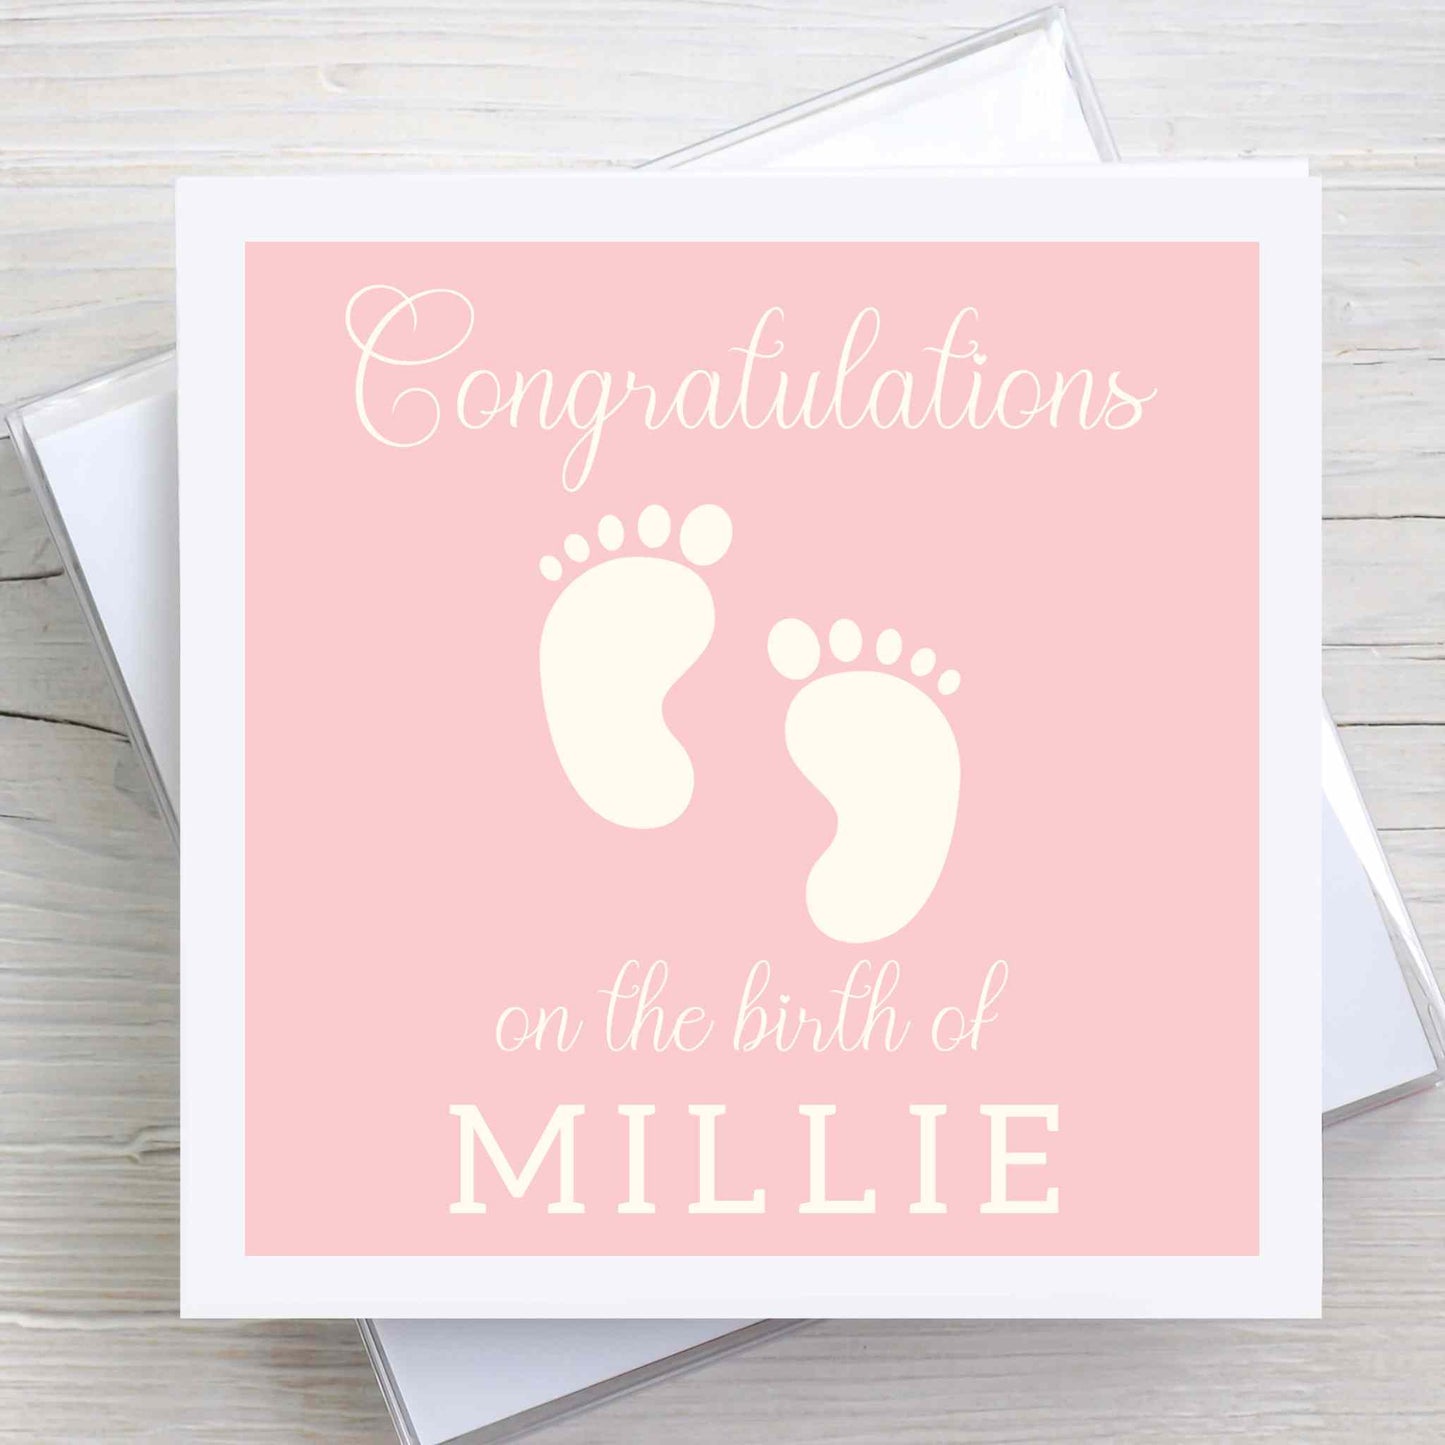 New baby congratulations card featuring baby feet design. Baby name on front. Pink coloured background.